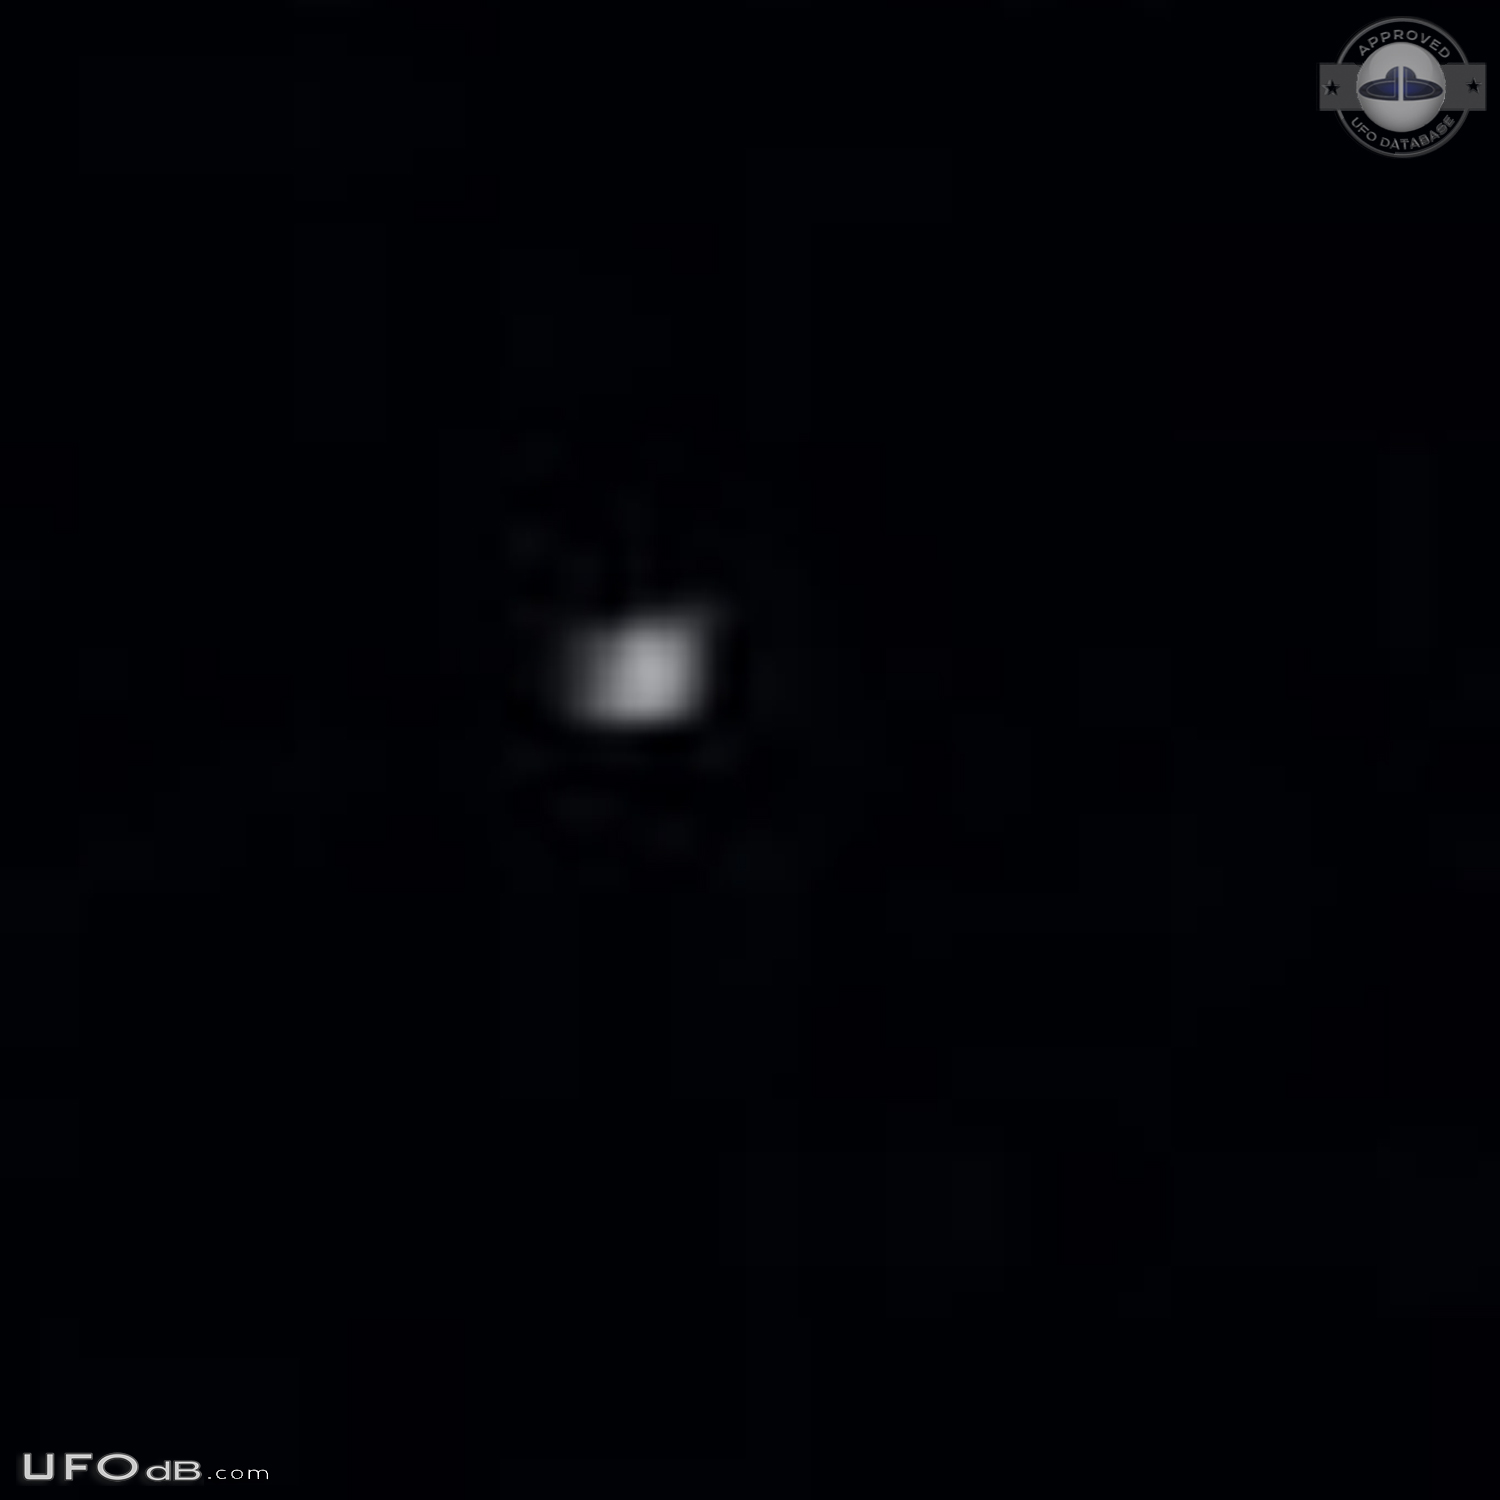 3 bright red UFOs triangle formation in Fresno California USA 2015 UFO Picture #663-4